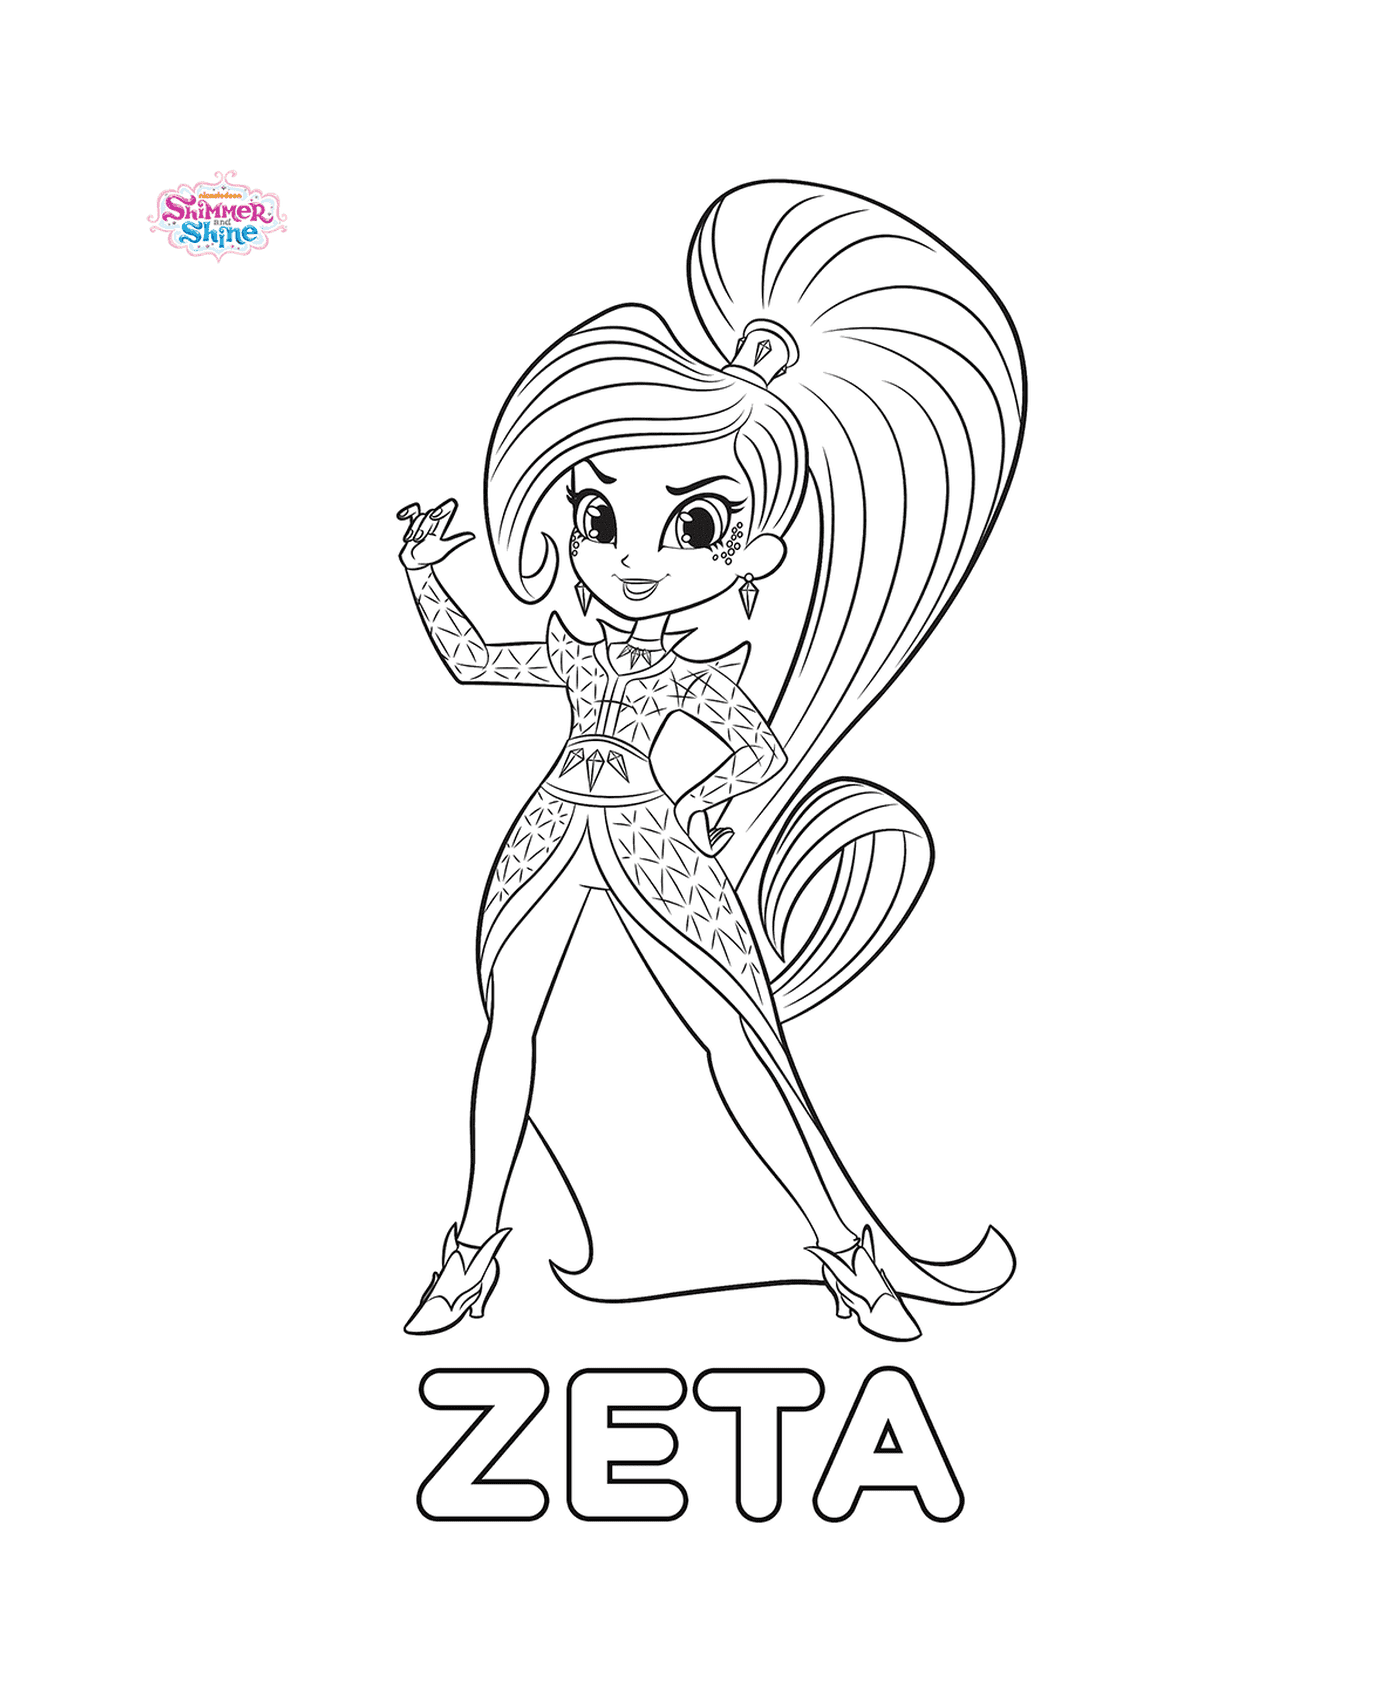  Zeta from Shimmer and Shine 